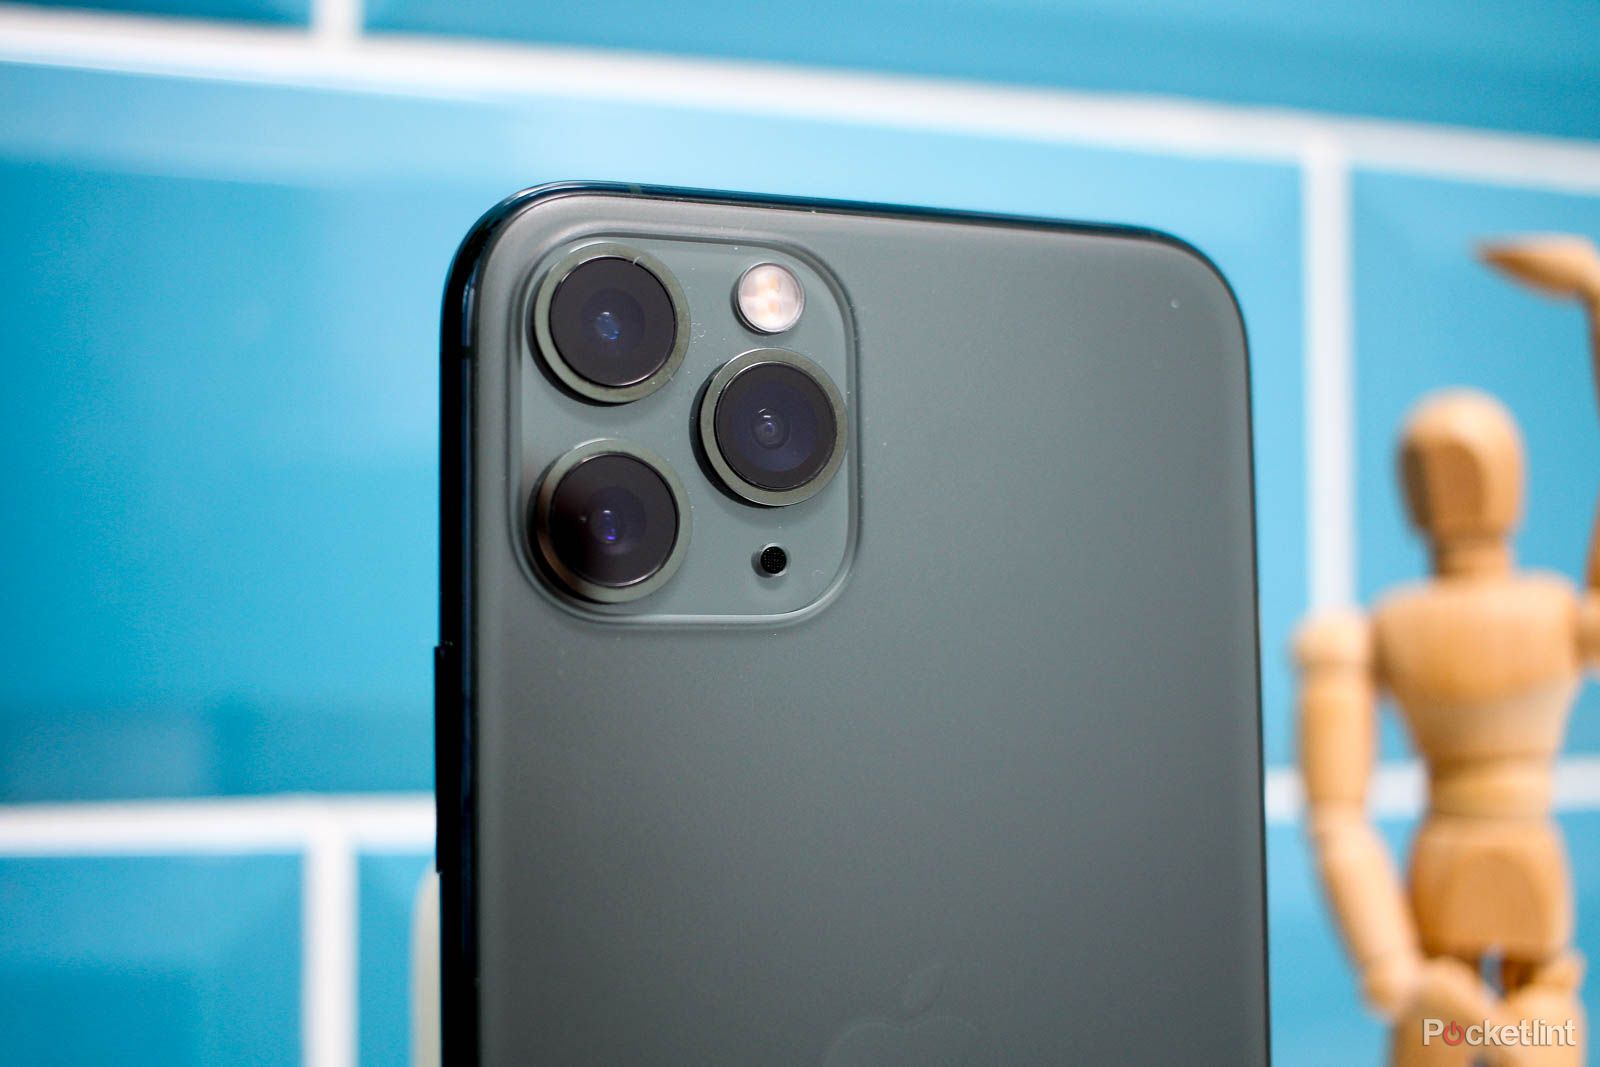 The standard iPhone 12 will be thinner and bigger than the iPhone 11 image 1